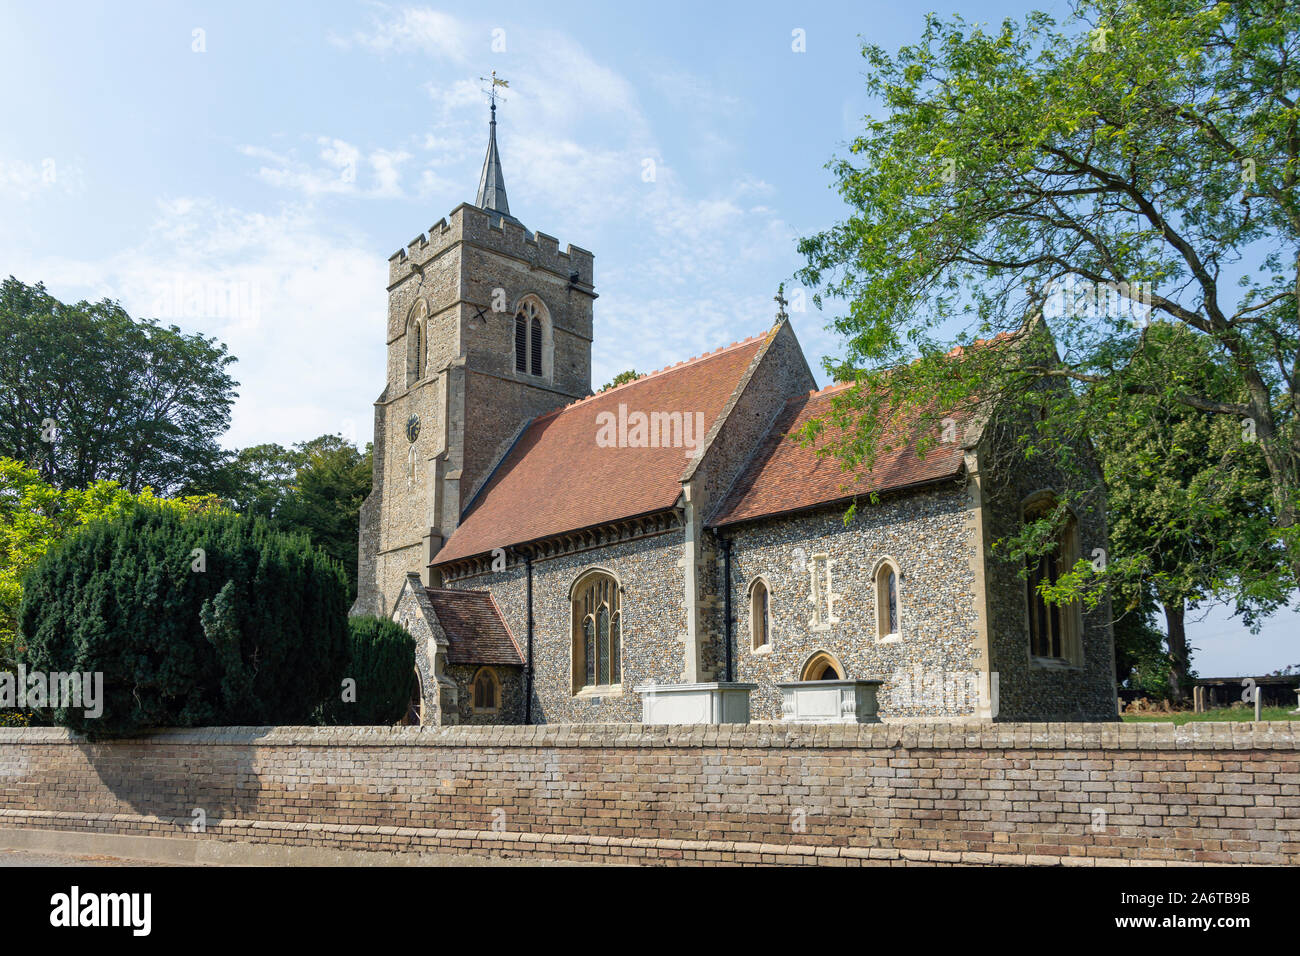 St Mary the Virgin Church, Flint Cottages, Westmill, Hertfordshire, England, United Kingdom Stock Photo